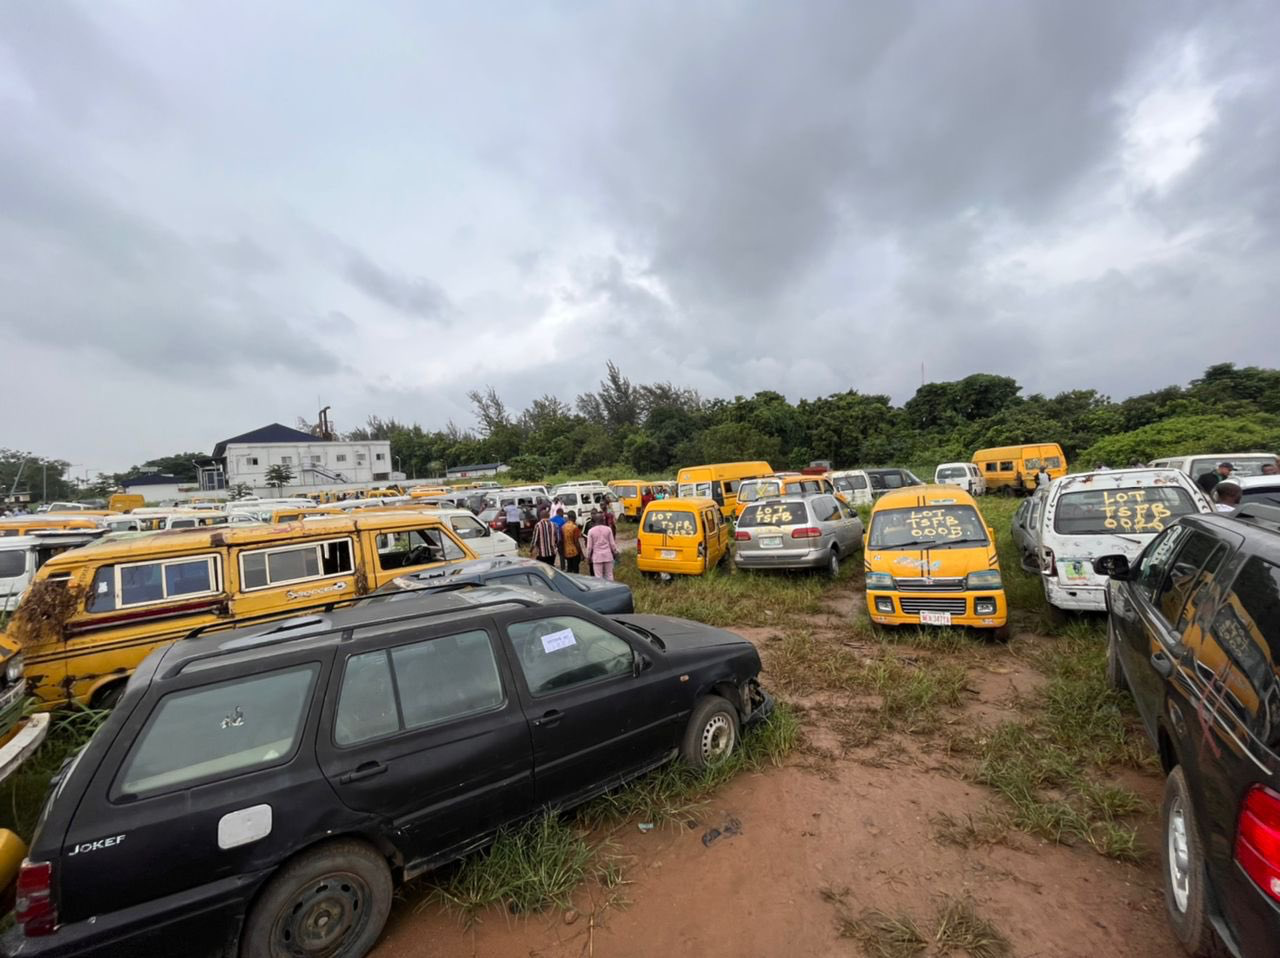 Vehicles auctioned for traffic infractions in Lagos state